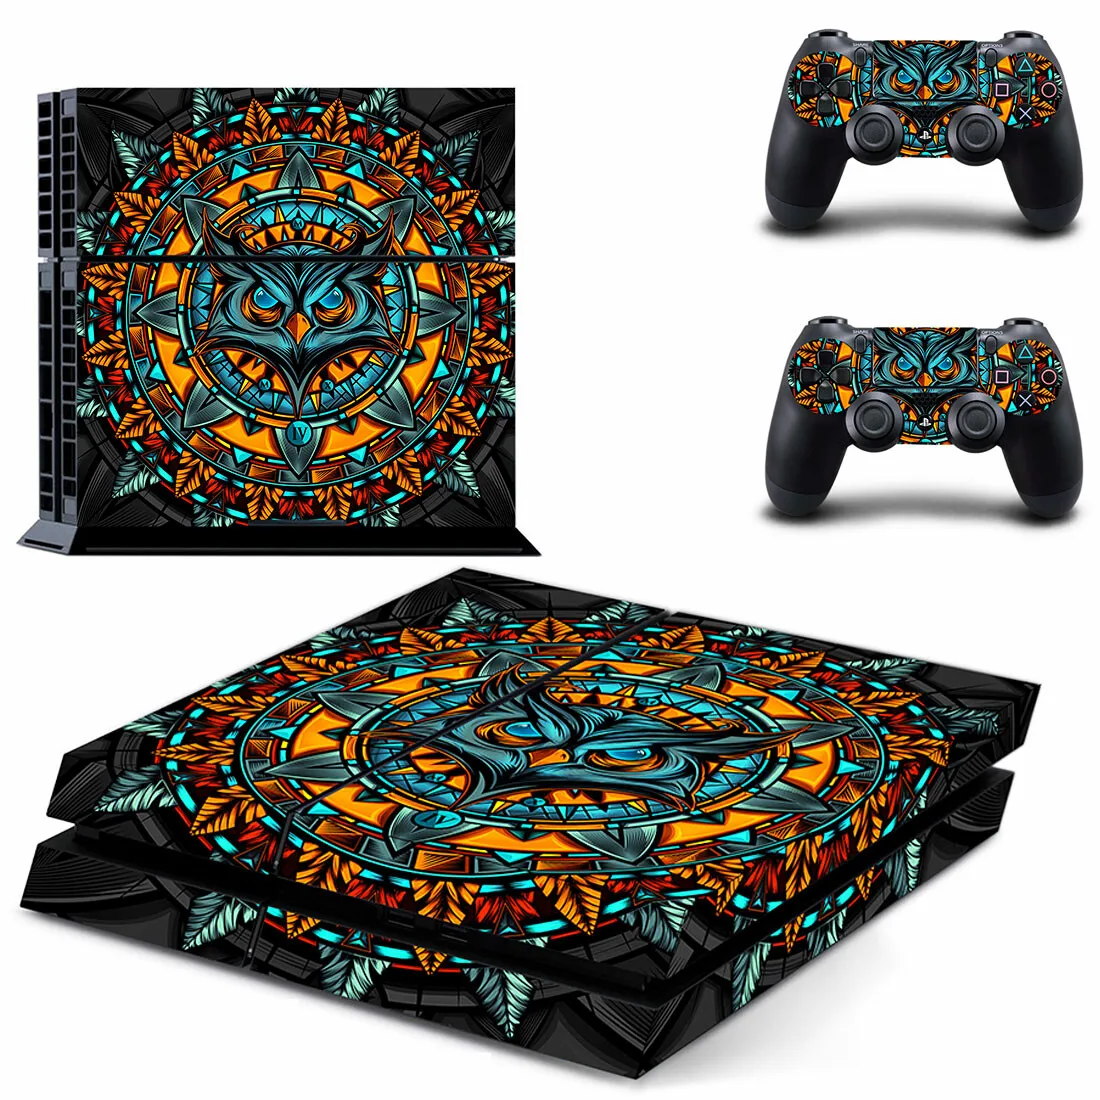 New Design PS4 Stickers Play station 4 Skin Sticker Decals Cover For PlayStation 4 PS4 Console & Controller Skins Vinyl